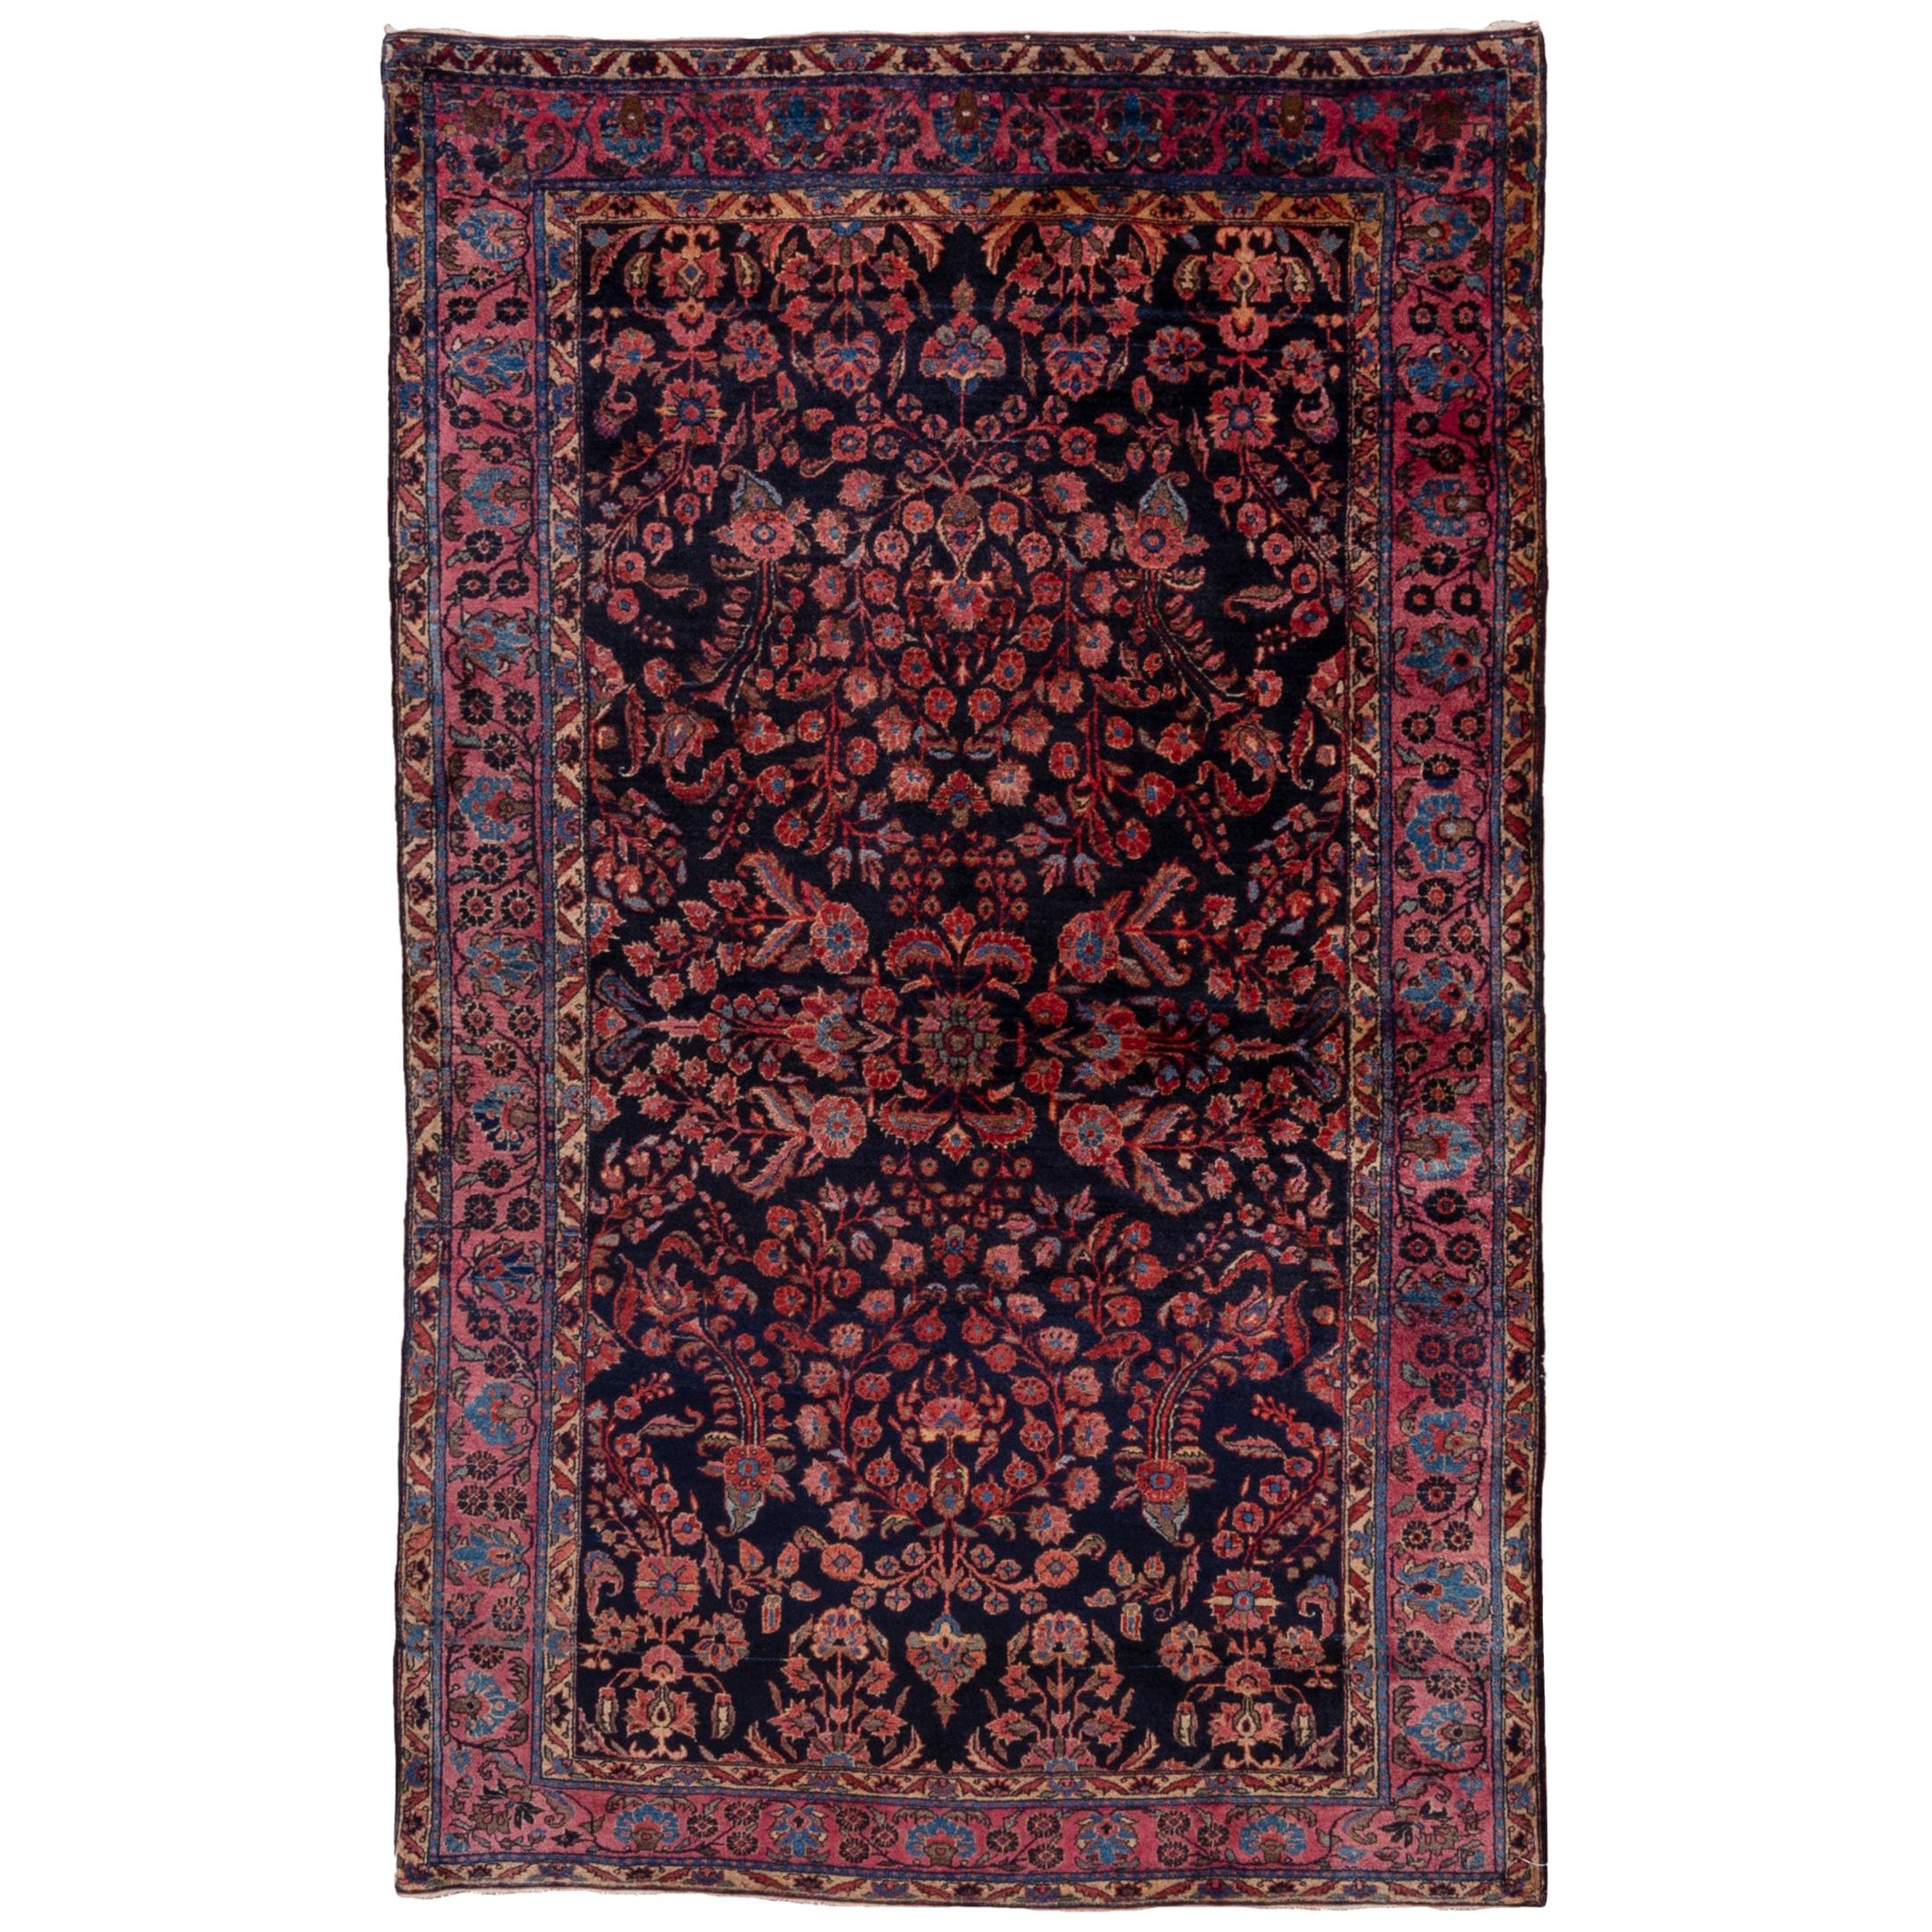 Antique Persian Sarouk Rug, American Style, Navy All-Over Field and Pink Accents